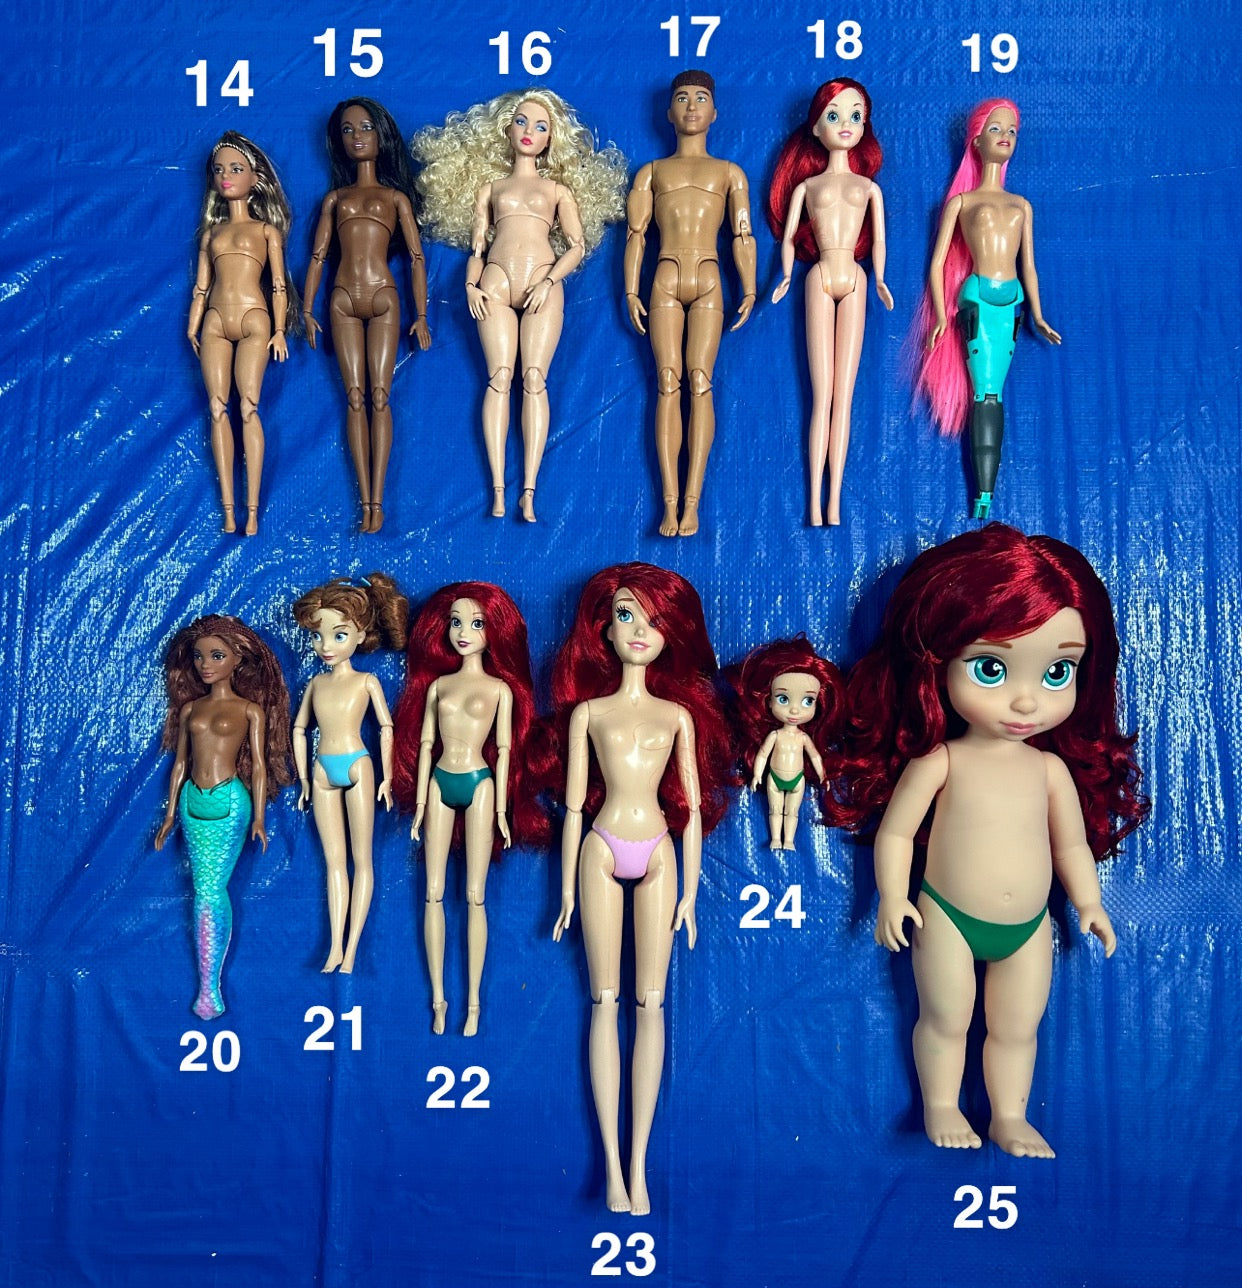 Ariel silicone mermaid tail for doll (doll not included)